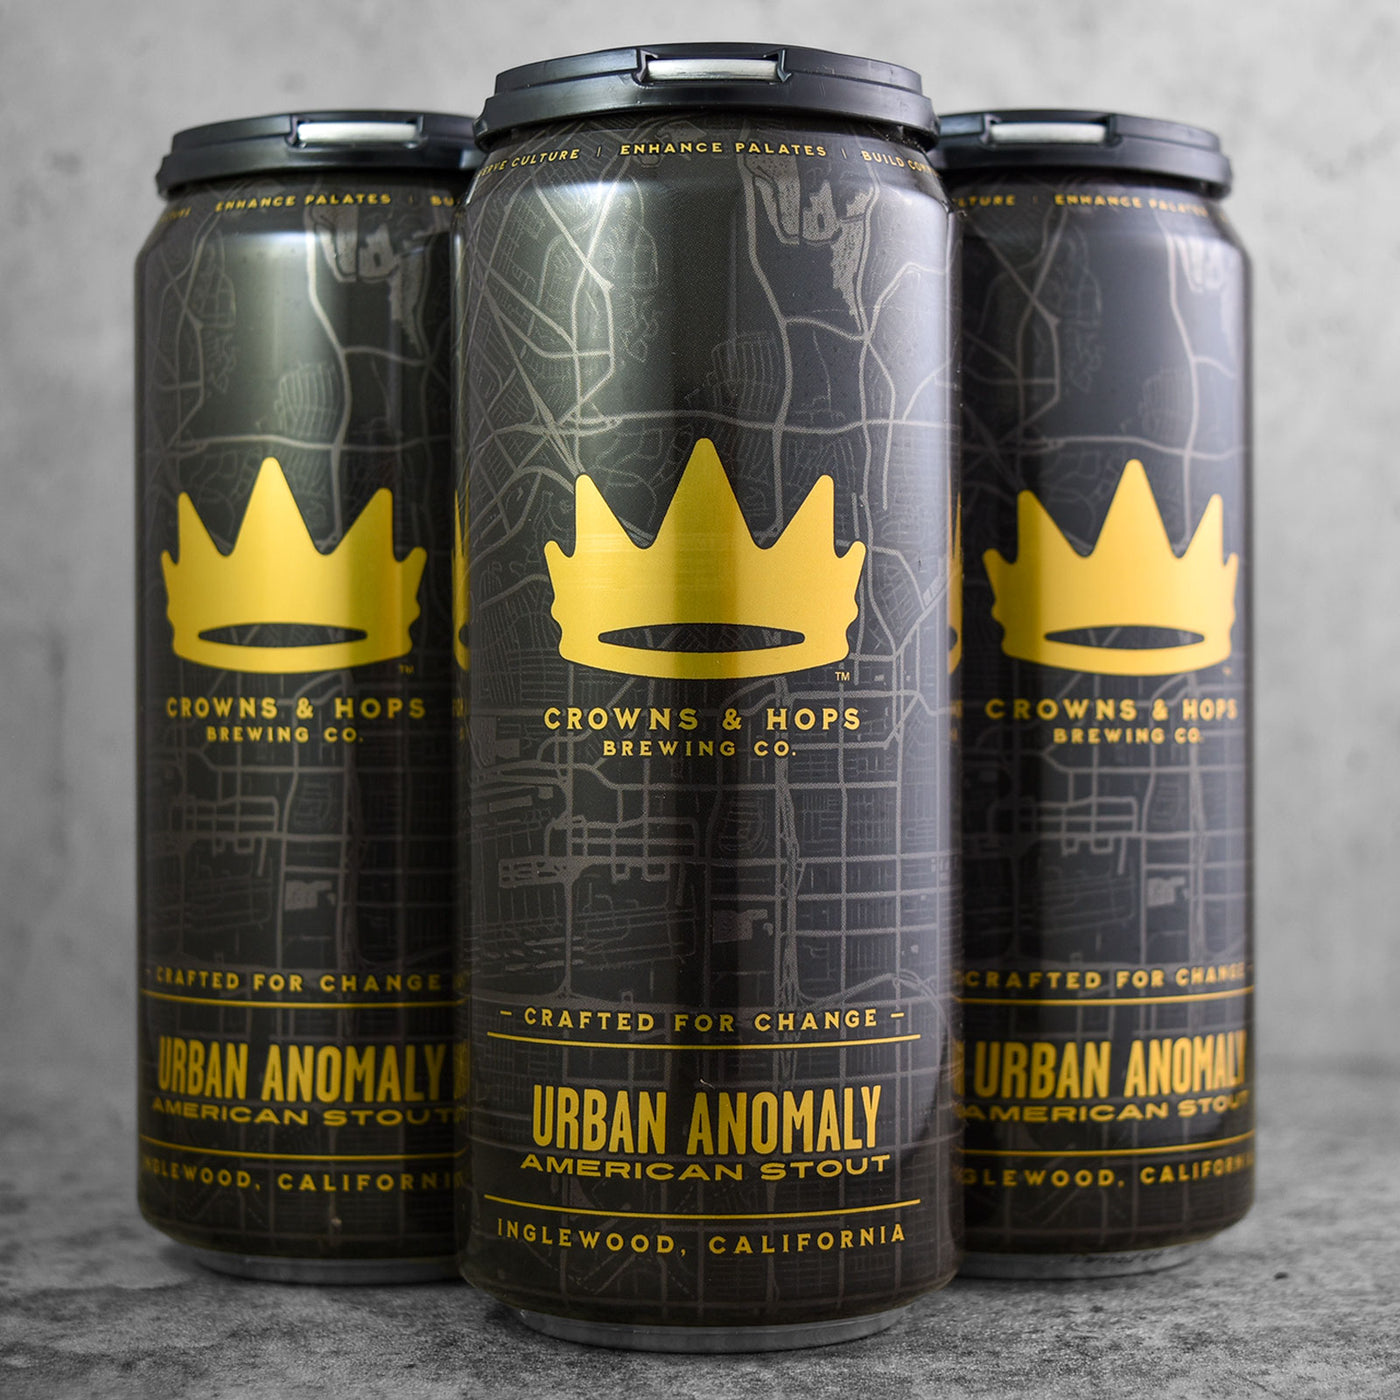 Crowns & Hops Urban Anomaly